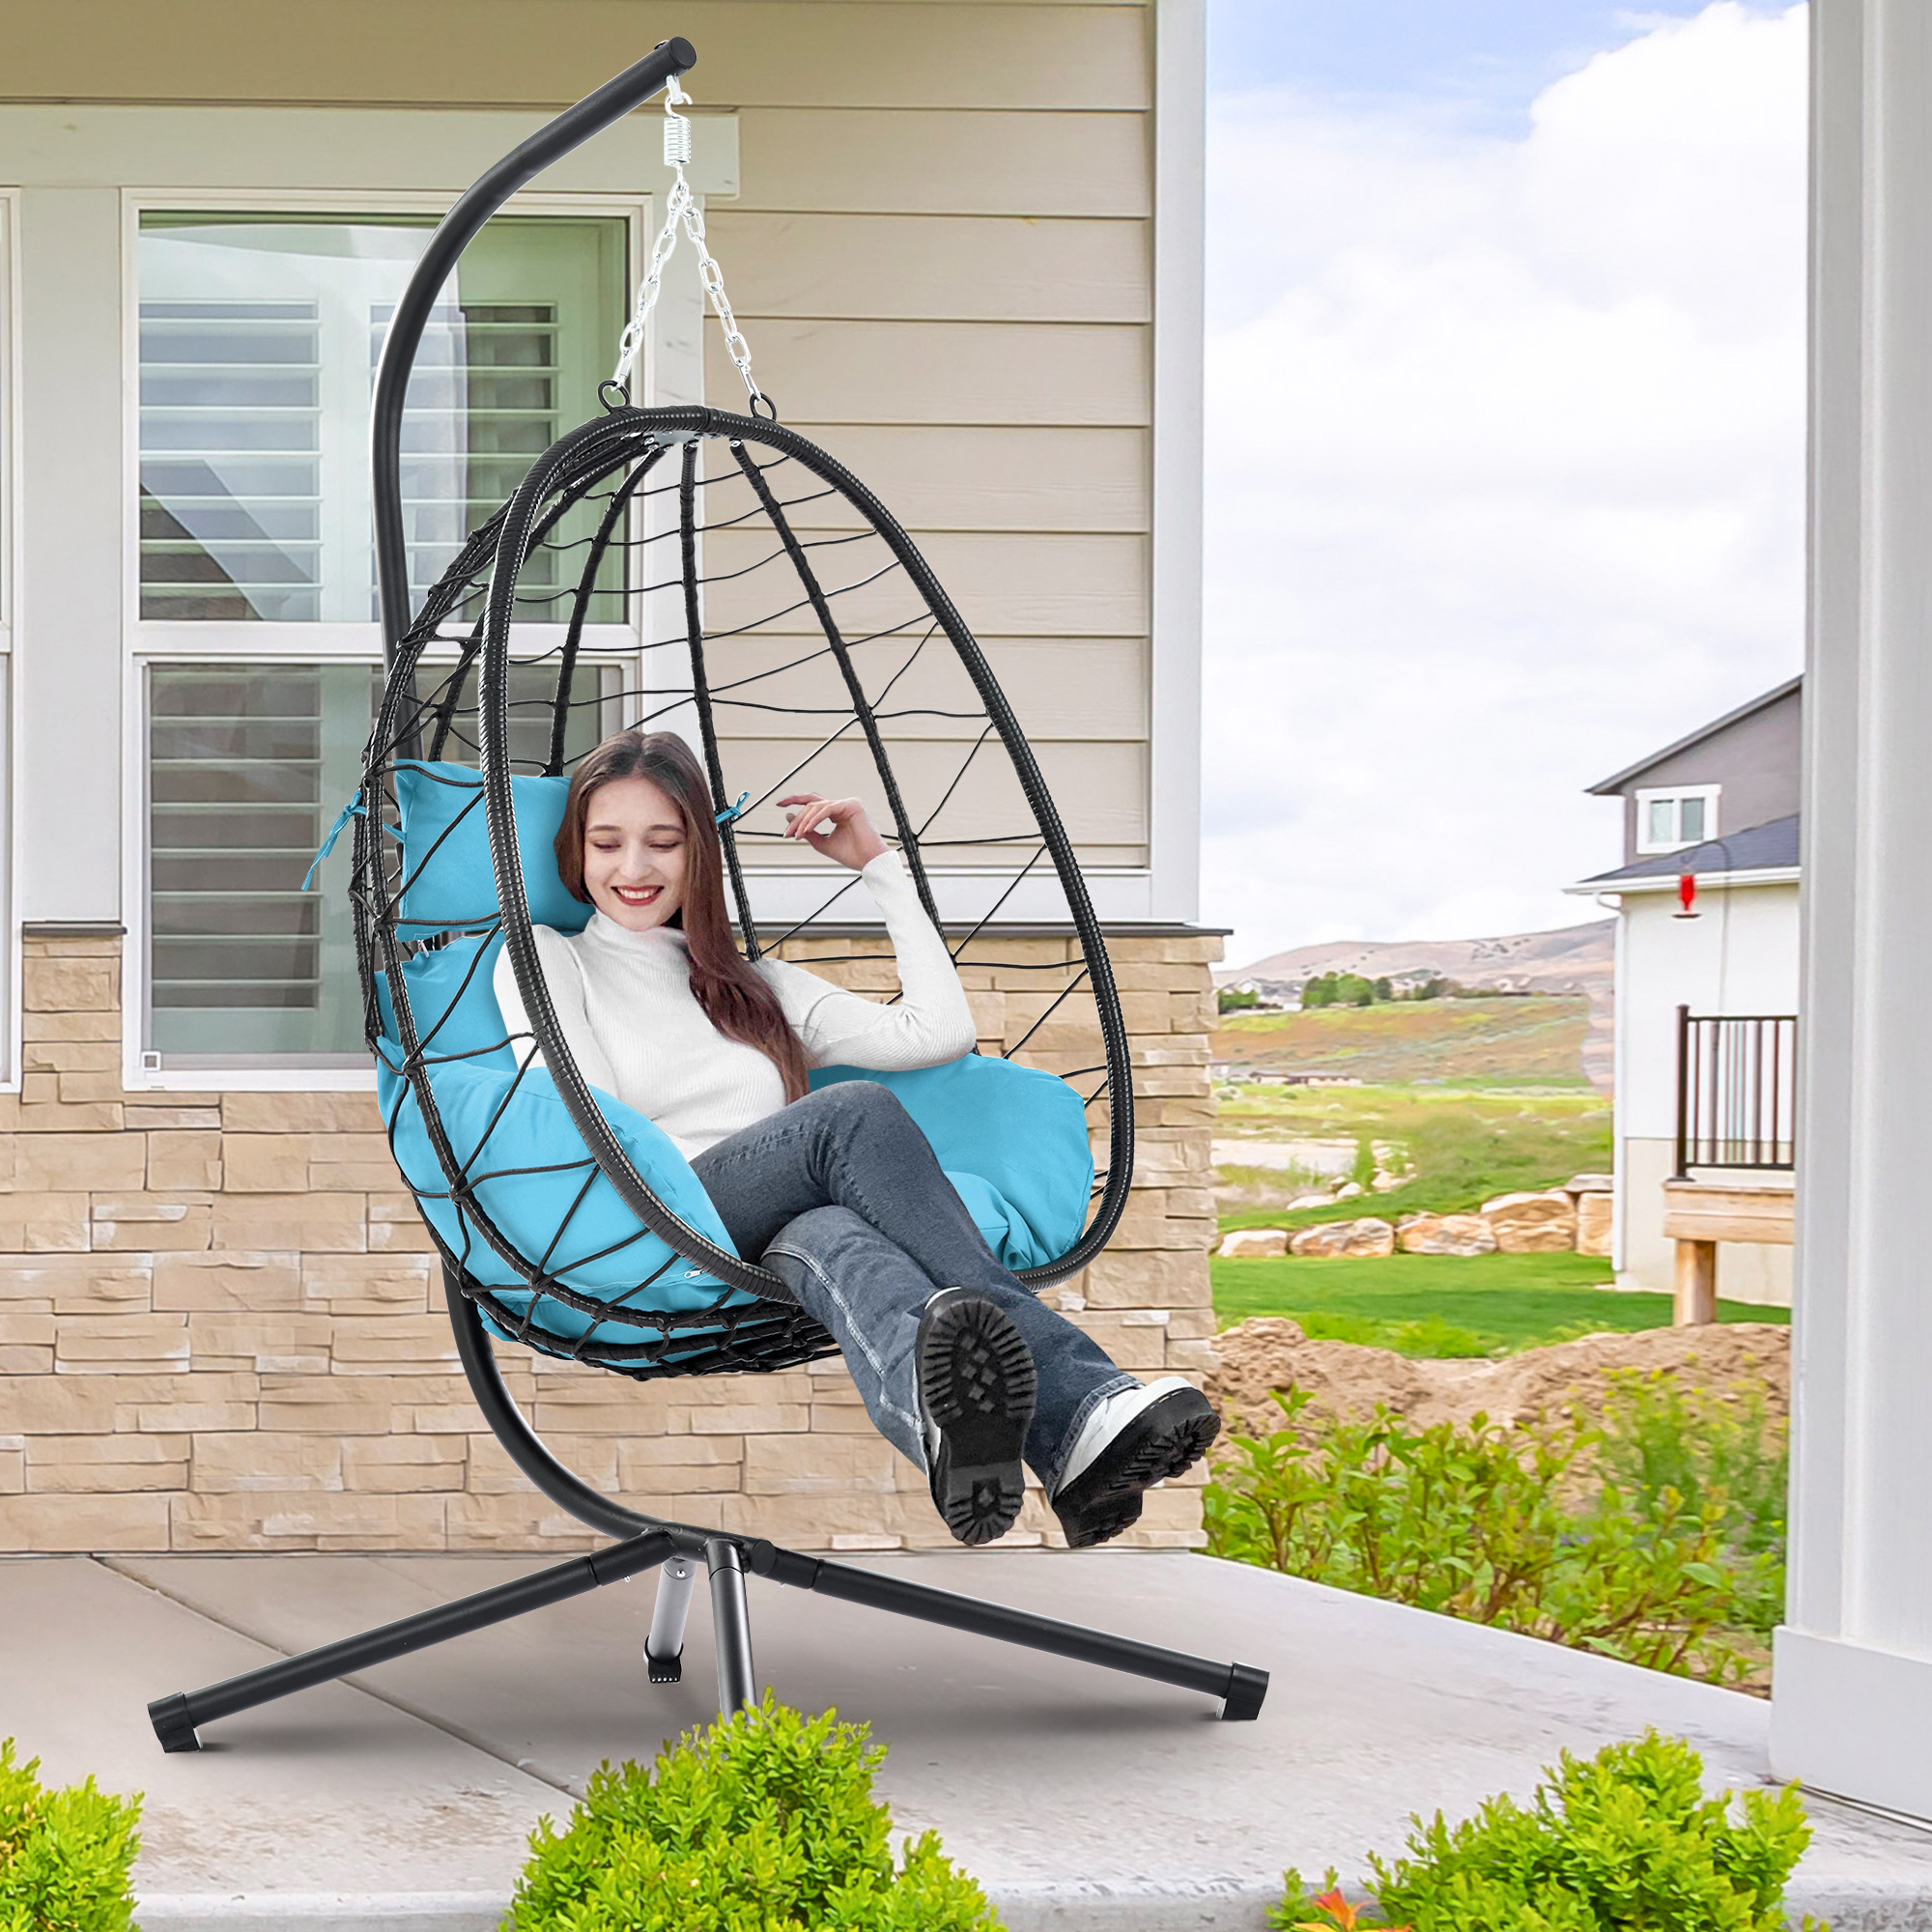 Egg Chair, Indoor Outdoor Patio Wicker Hanging Chair with Stand, Hanging Swing Chair w/ Cushion, Durable All-Weather UV Rattan Lounge Chair for Bedroom, Patio, Deck, Yard, Garden, 350lbs, Blue, SS1968 - image 1 of 9